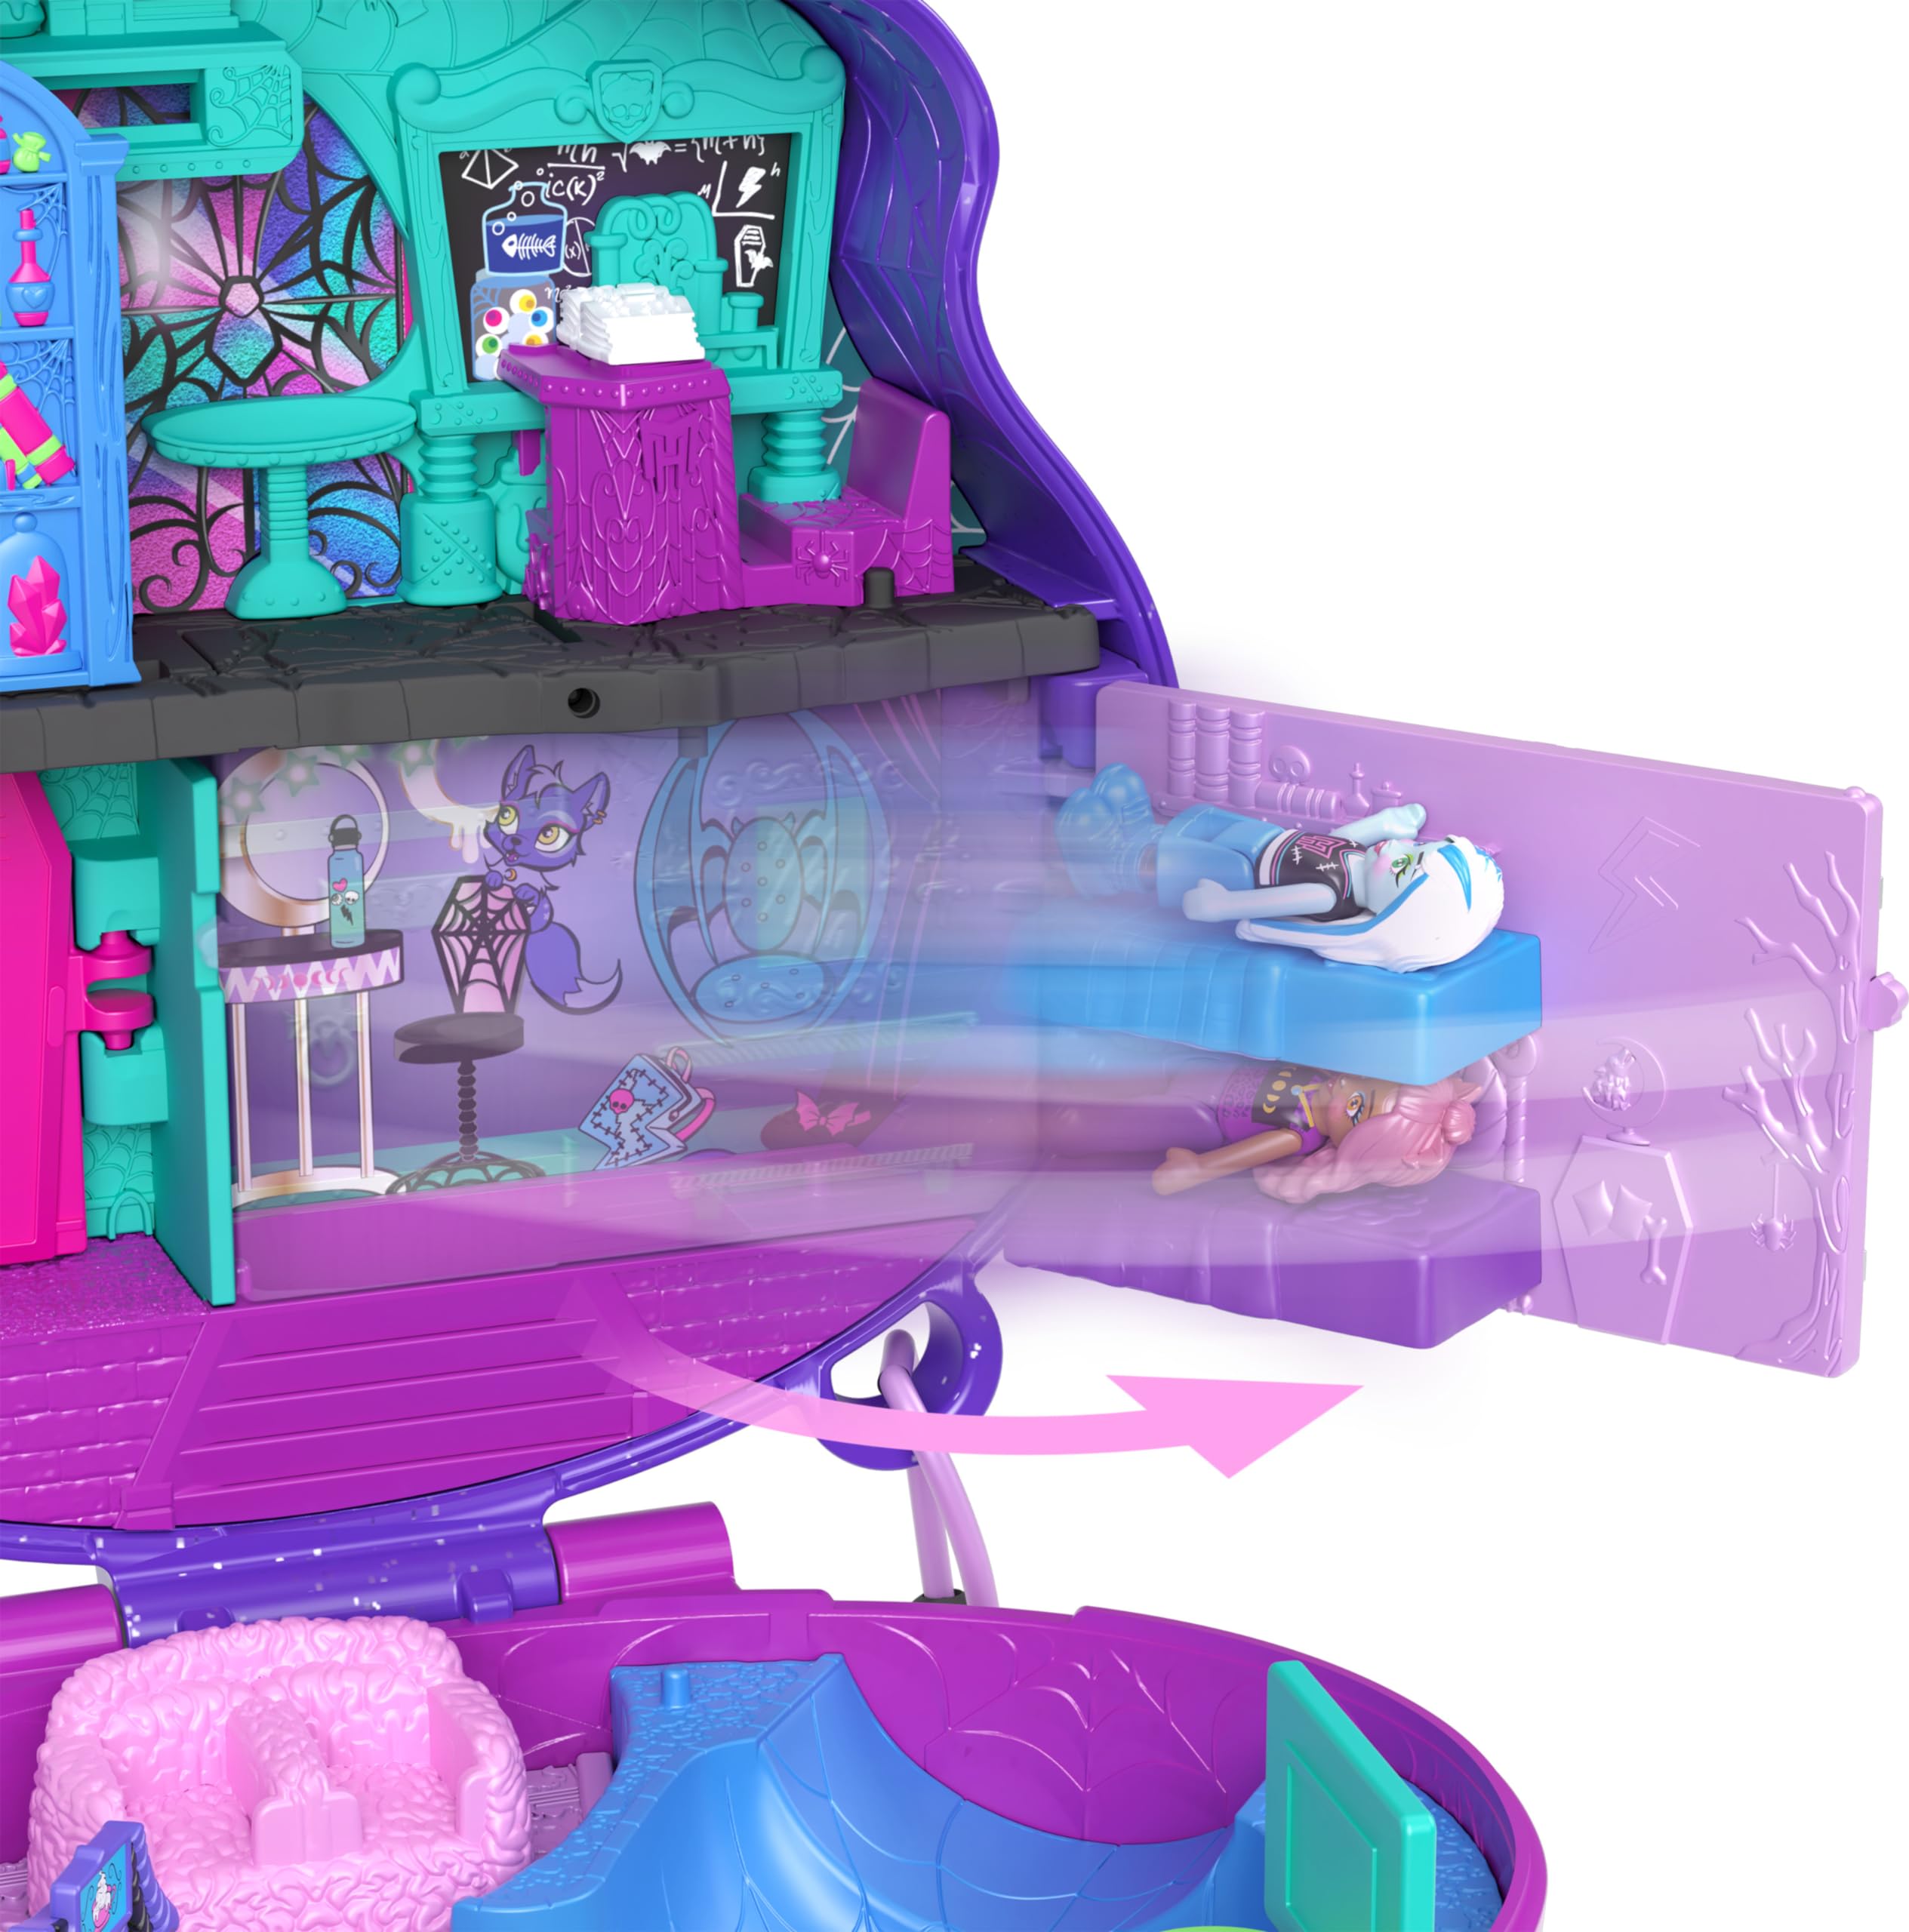 ​Polly Pocket Monster High Playset with 3 Micro Dolls & 10 Accessories, Opens to High School, Collectible Travel Toy with Storage